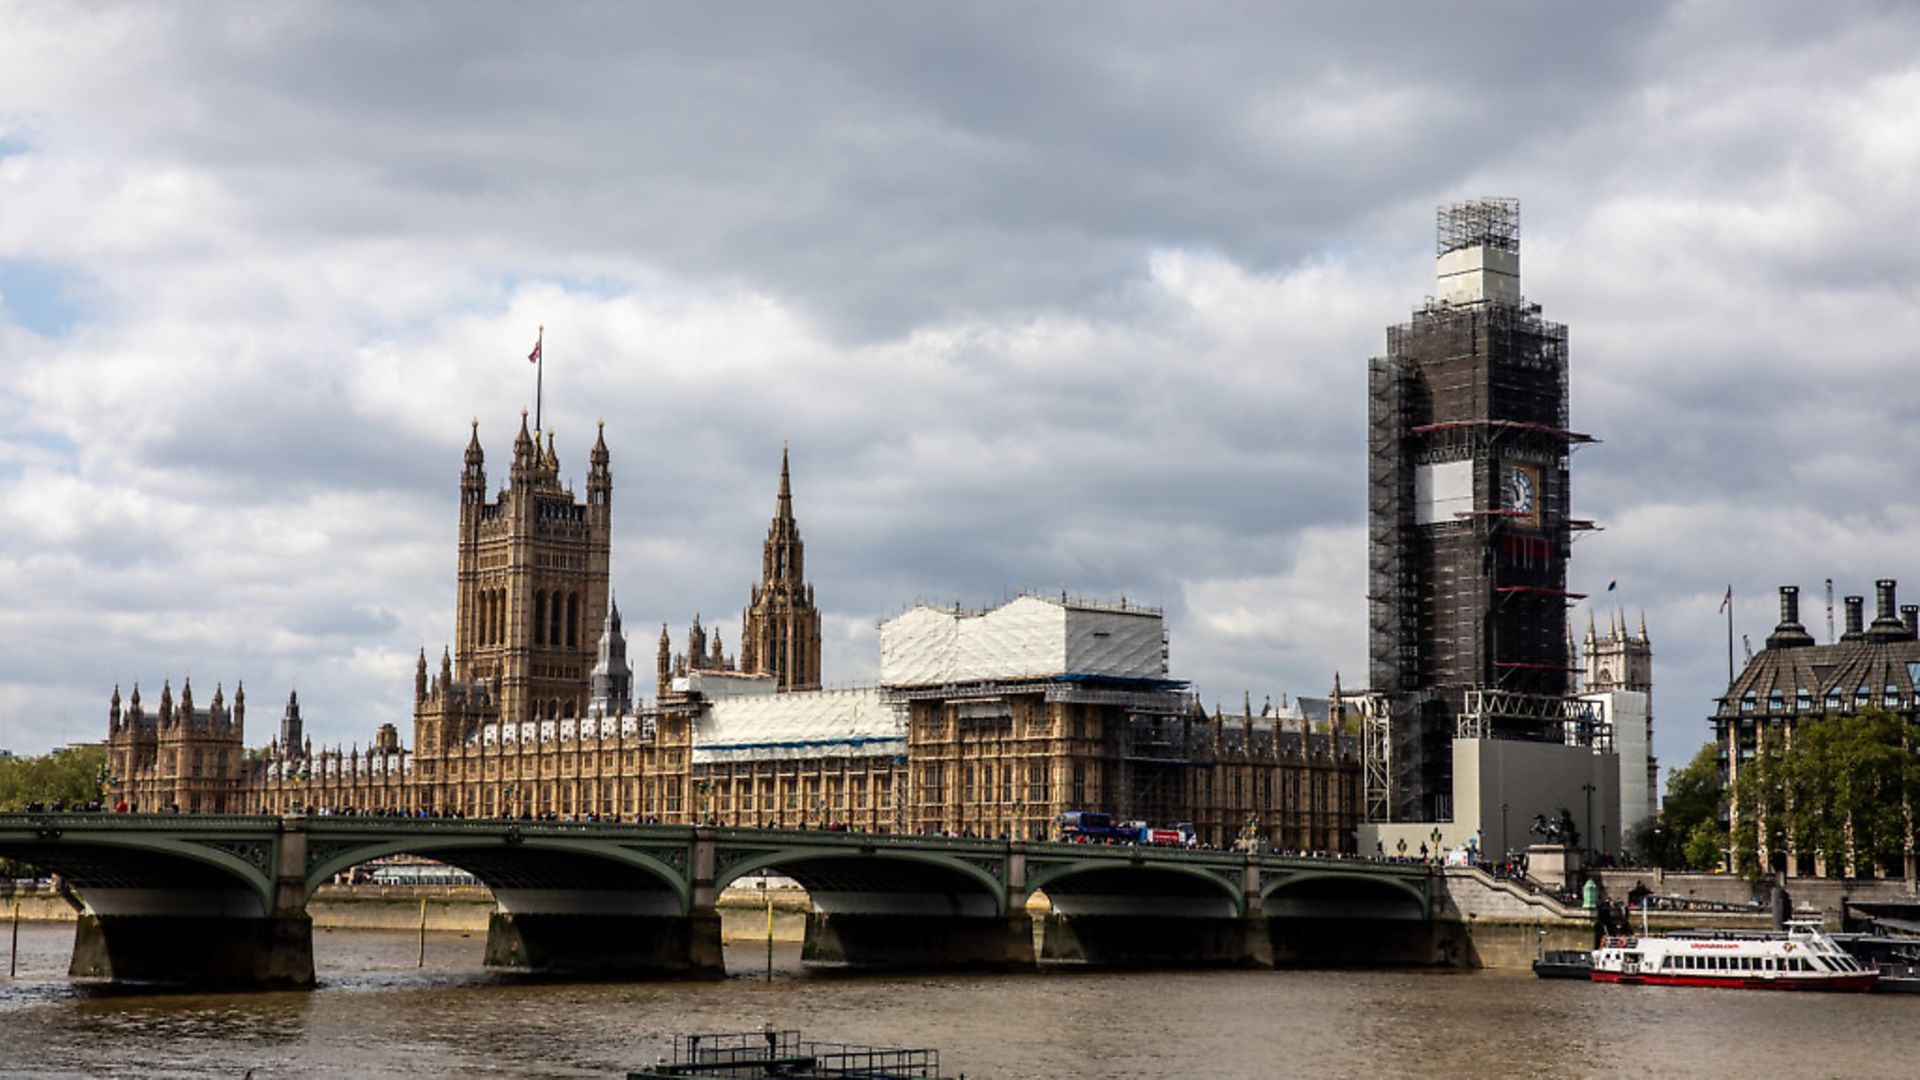 A view Houses of Parliament (Palace of Westminster) and Elizabeth Tower (Big Ben) in London, United Kingdom, on May 5, 2019. (Photo by Manuel Romano/NurPhoto via Getty Images) - Credit: NurPhoto via Getty Images